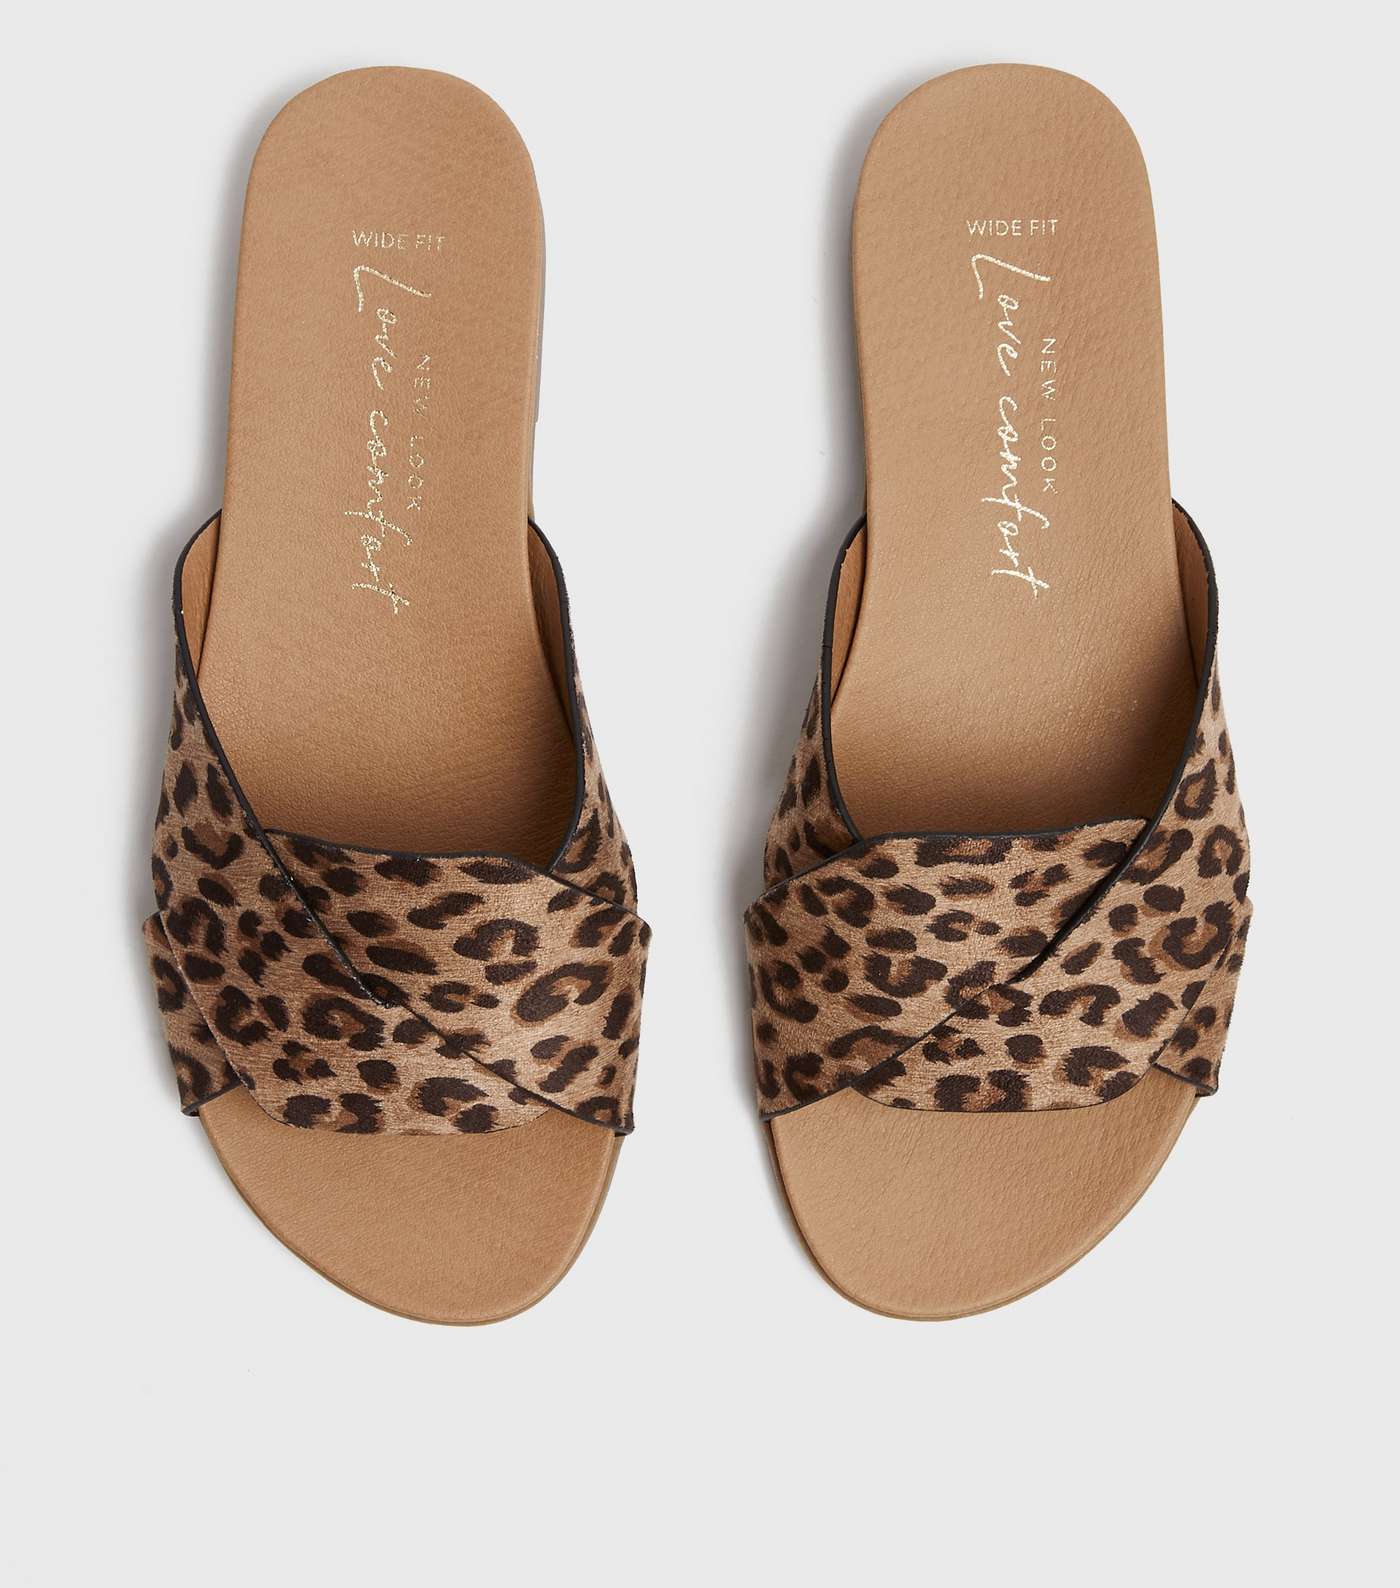 Wide Fit Stone Leopard Print Footbed Sliders Image 4